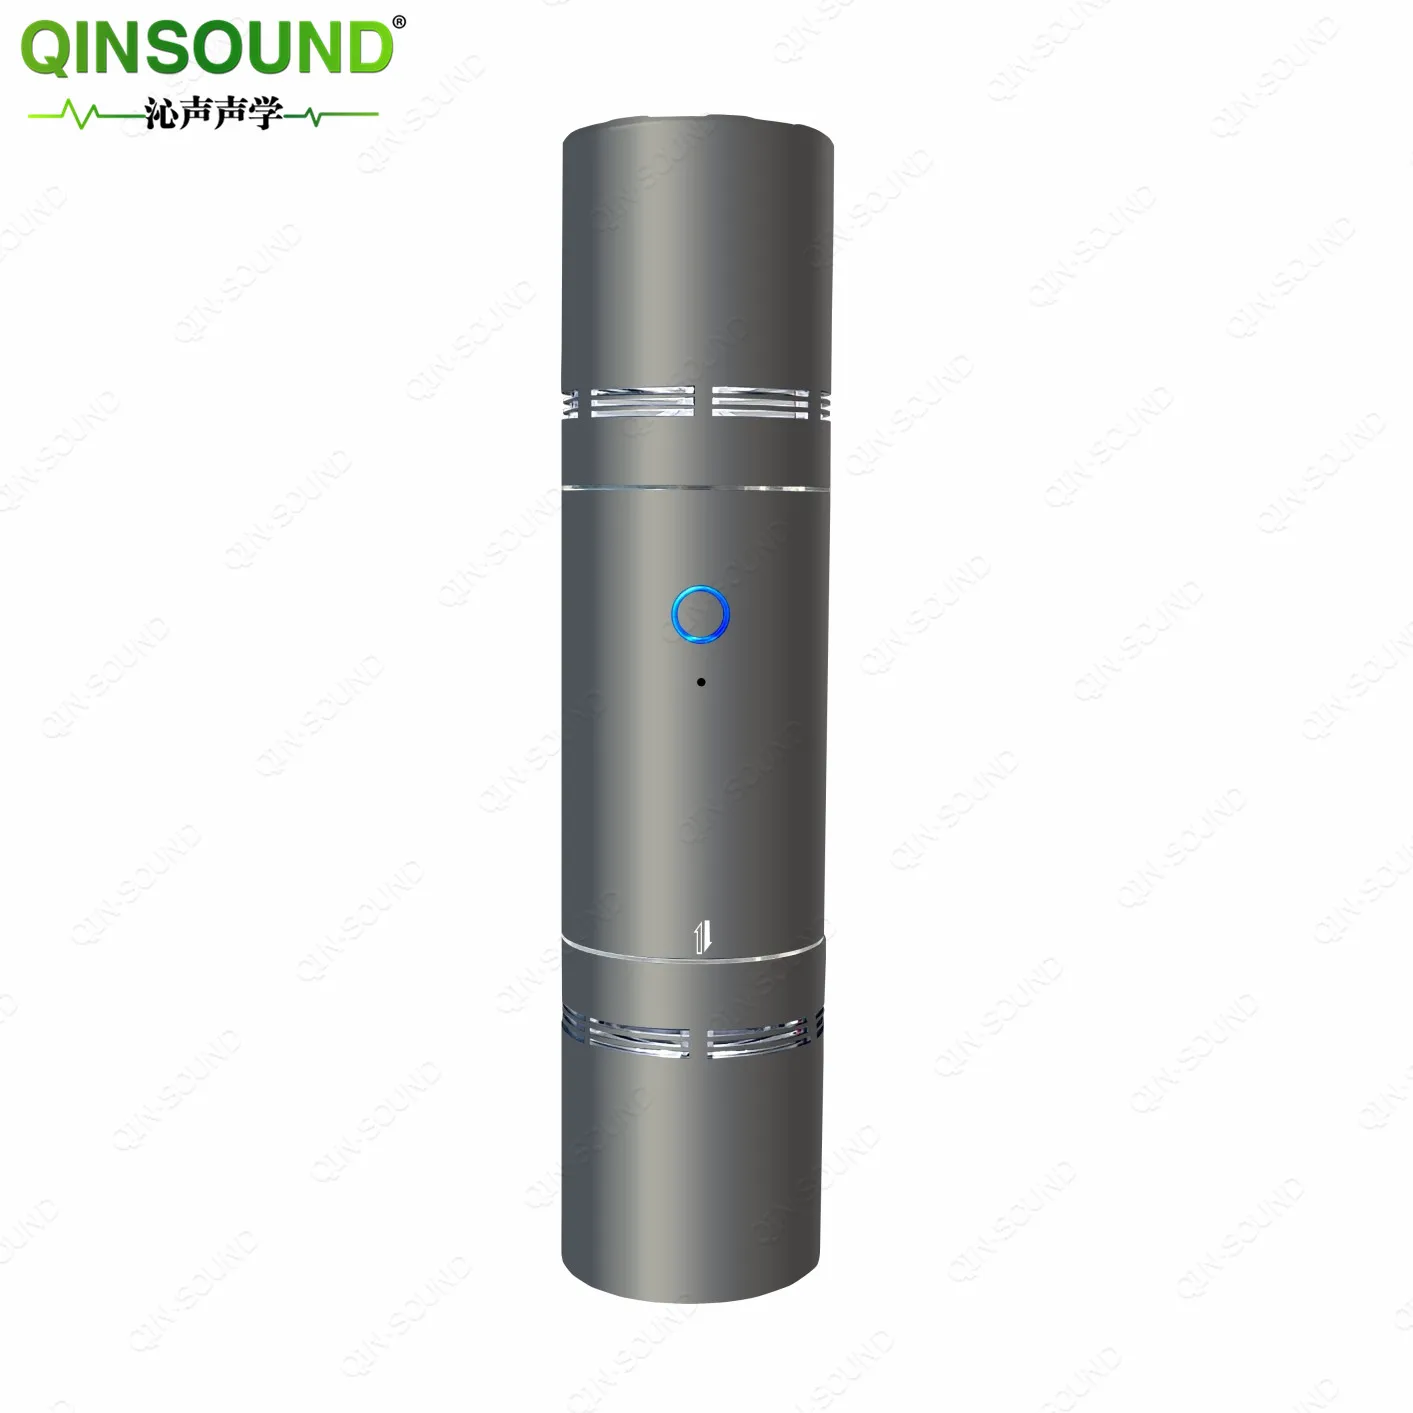 

Qinsound New arrival Portable Multi-function product MINI Speaker with USB charge Battery can hold on 8 hours, Blue/ grey/ pink